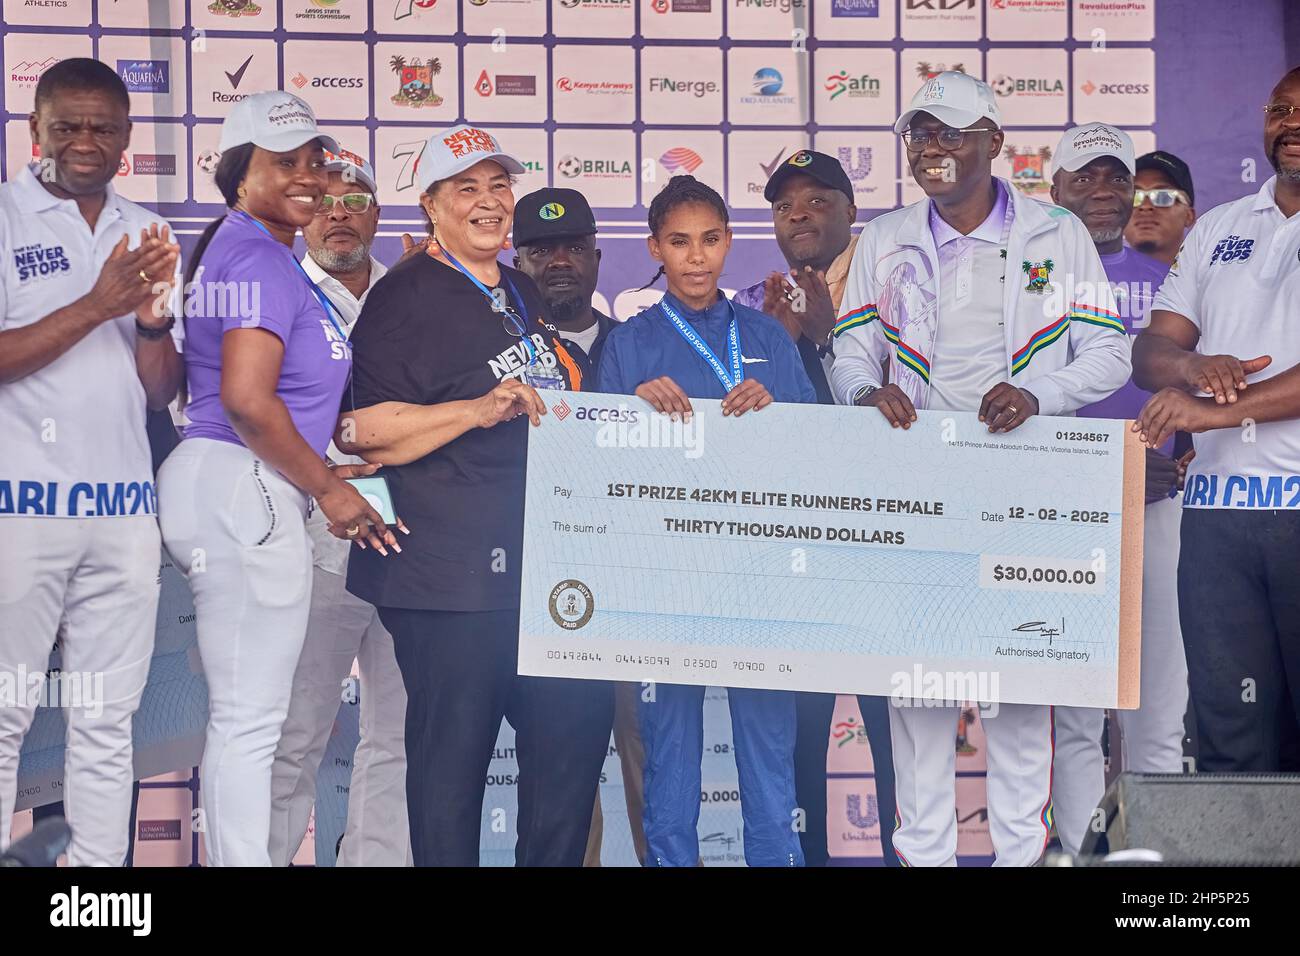 3rd place female winner, Dagne Siranesh receives a medal and prize money after competing in the Access Bank Lagos City Marathon on February 12, 2022. Stock Photo